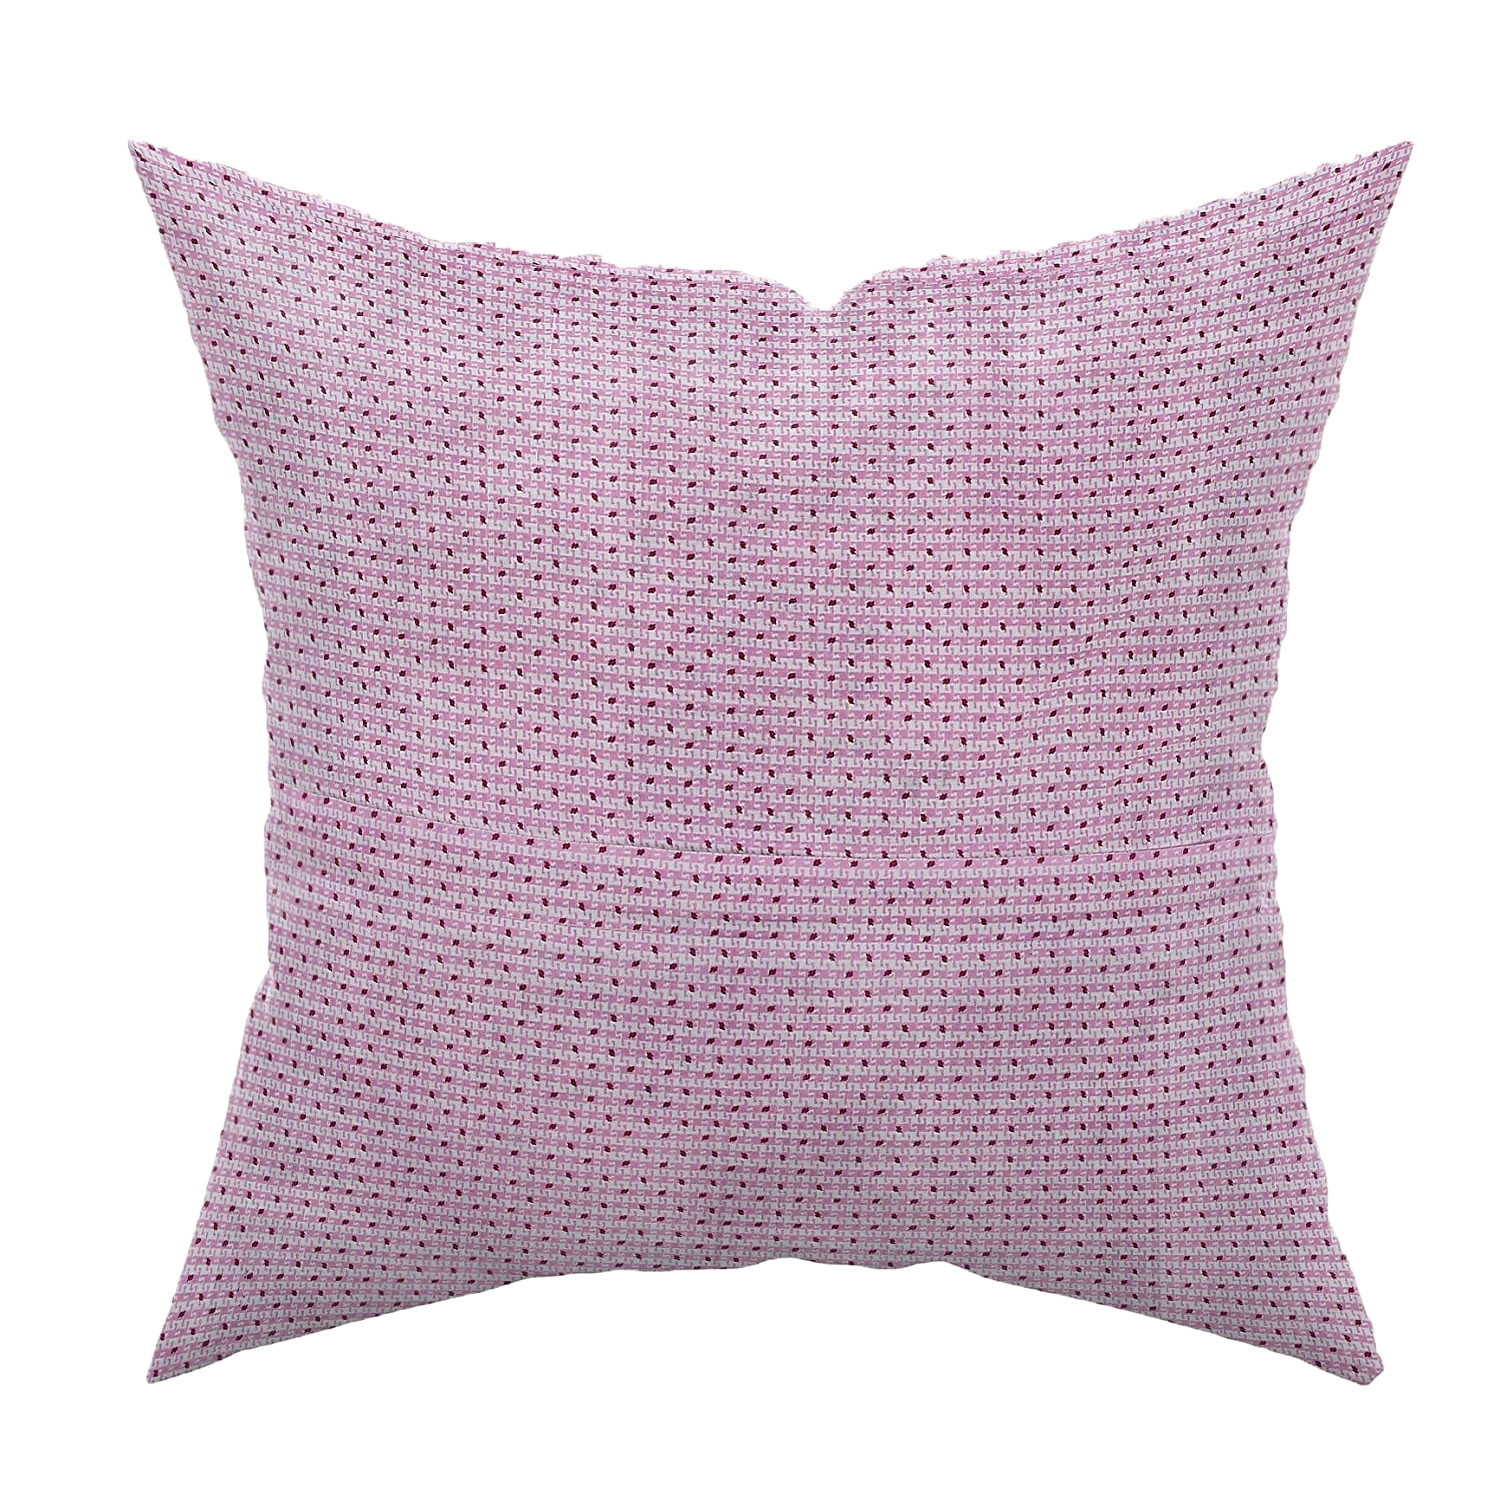 Kuber Industries Cushion Cover|Ractangle Cushion Covers|Sofa Cushion Covers|Cushion Covers 16 inch x 16 inch|Cushion Cover Set of 5|PINK